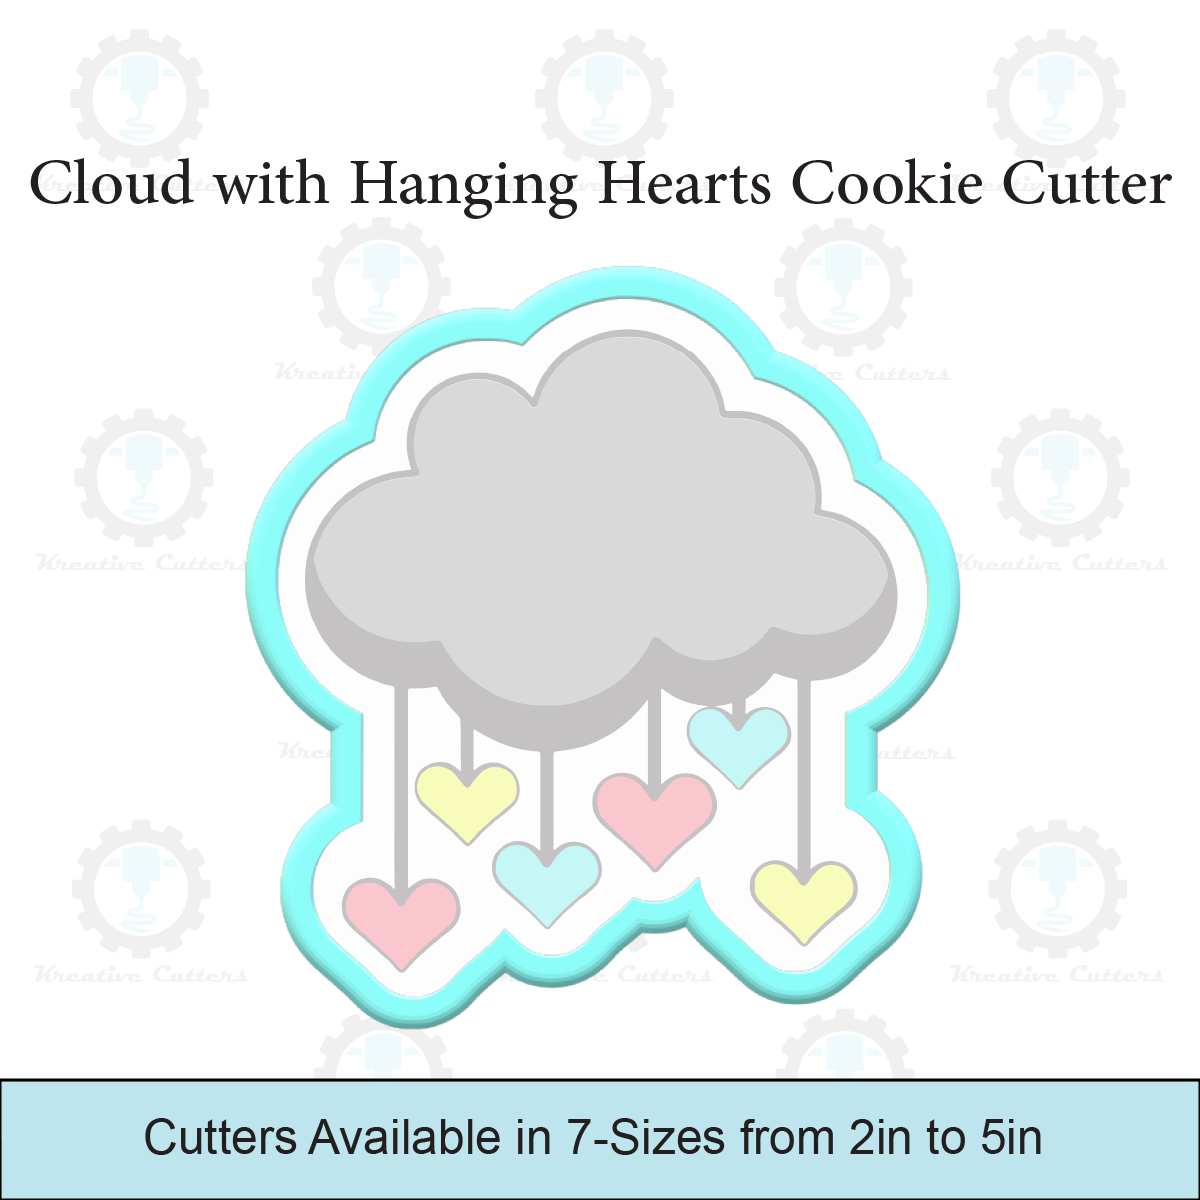 Cloud with Hanging Hearts Cookie Cutters